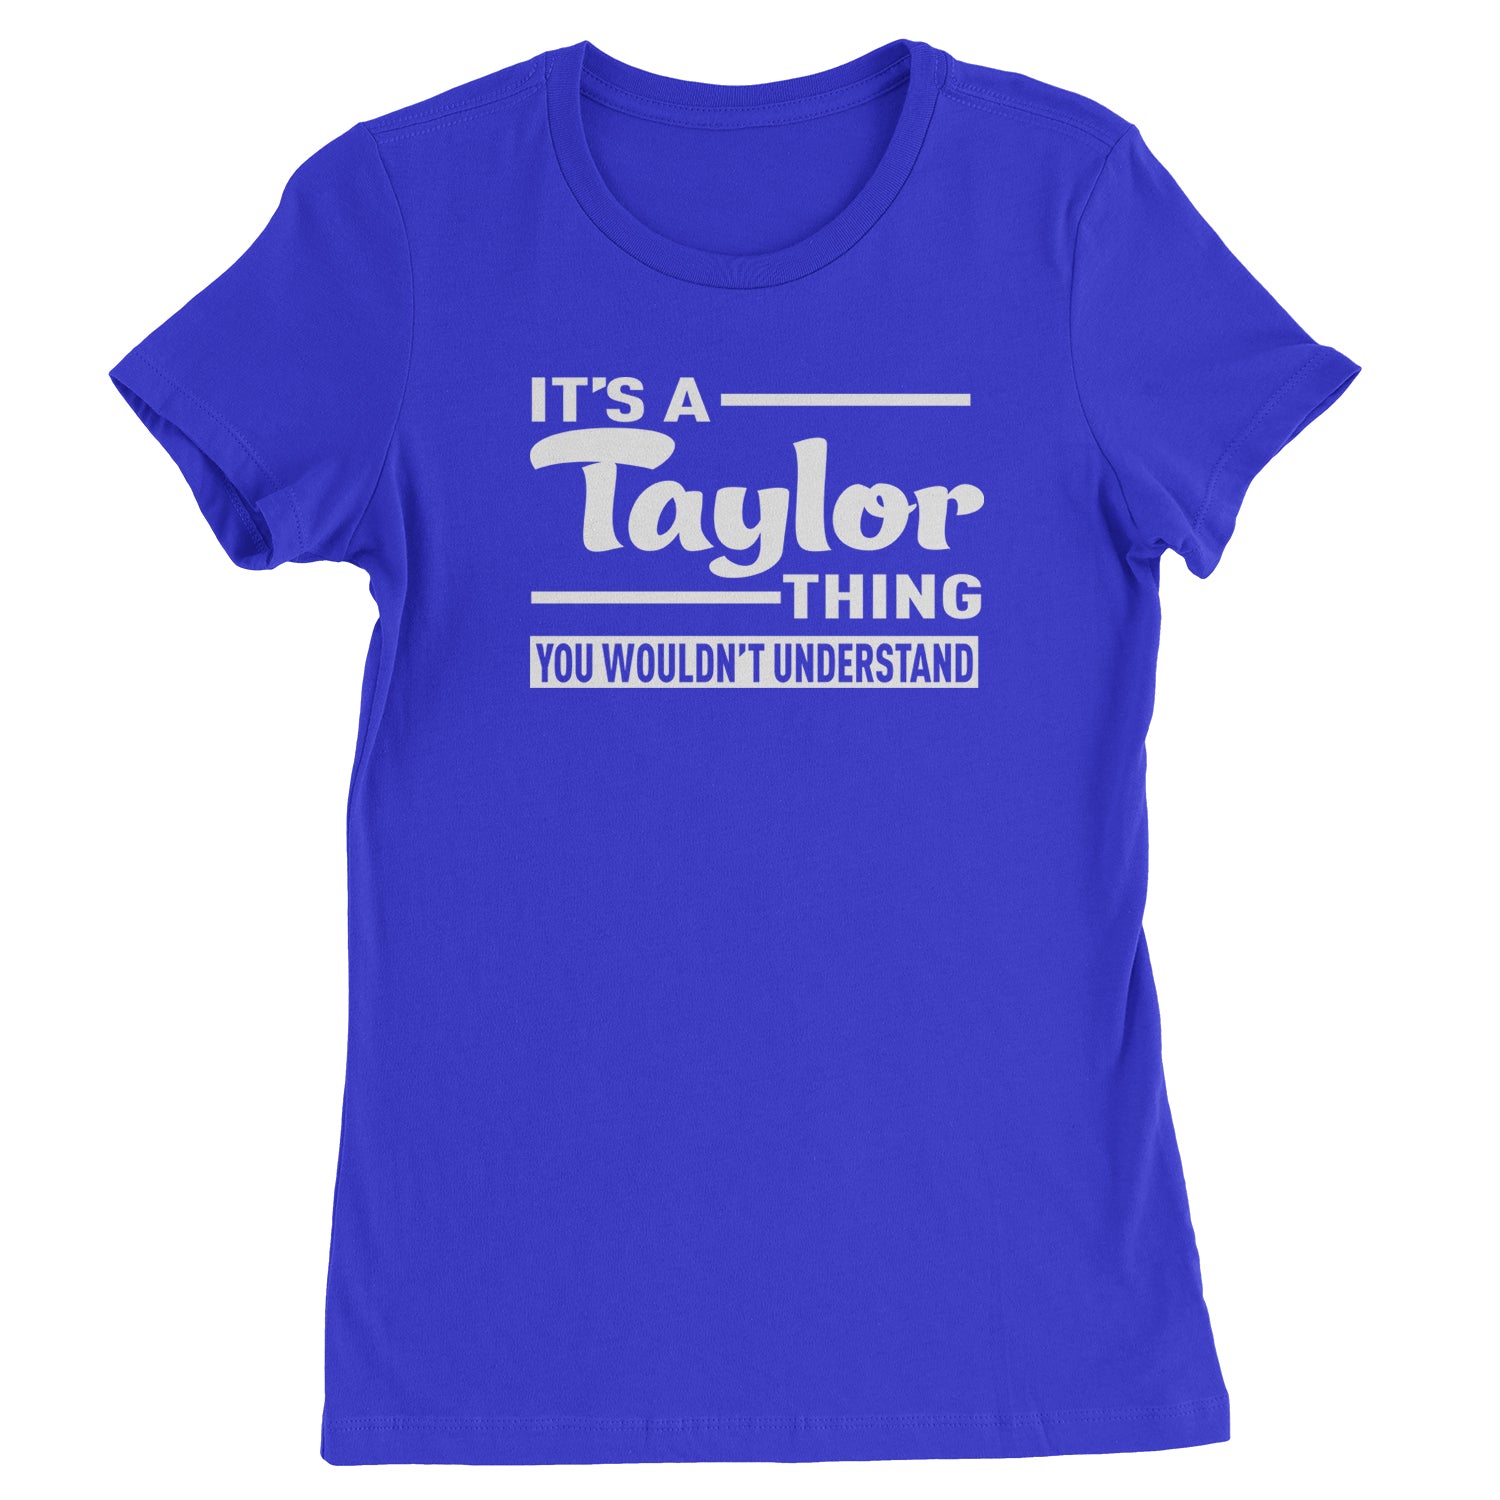 It's A Taylor Thing, You Wouldn't Understand Womens T-shirt nation, taylornation by Expression Tees